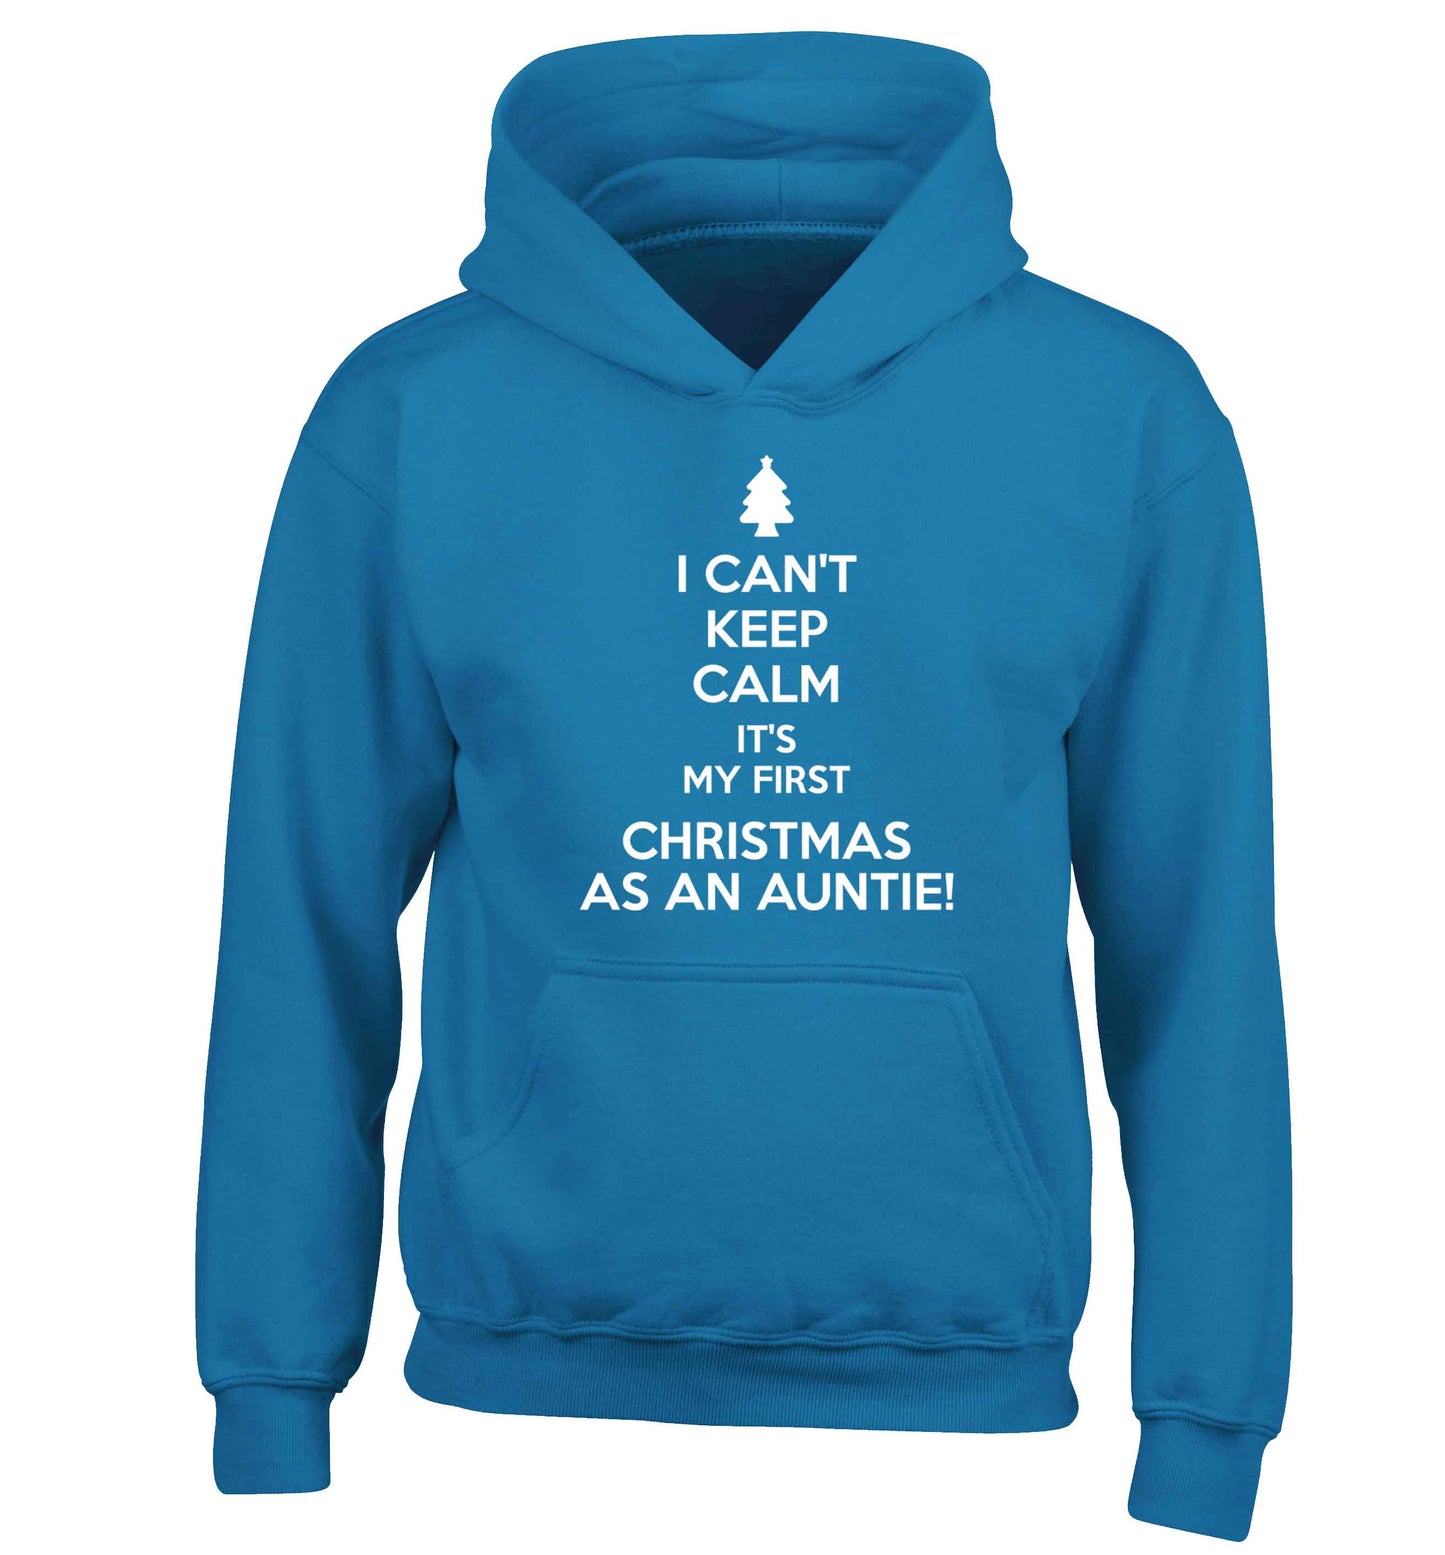 I can't keep calm it's my first Christmas as an auntie! children's blue hoodie 12-13 Years